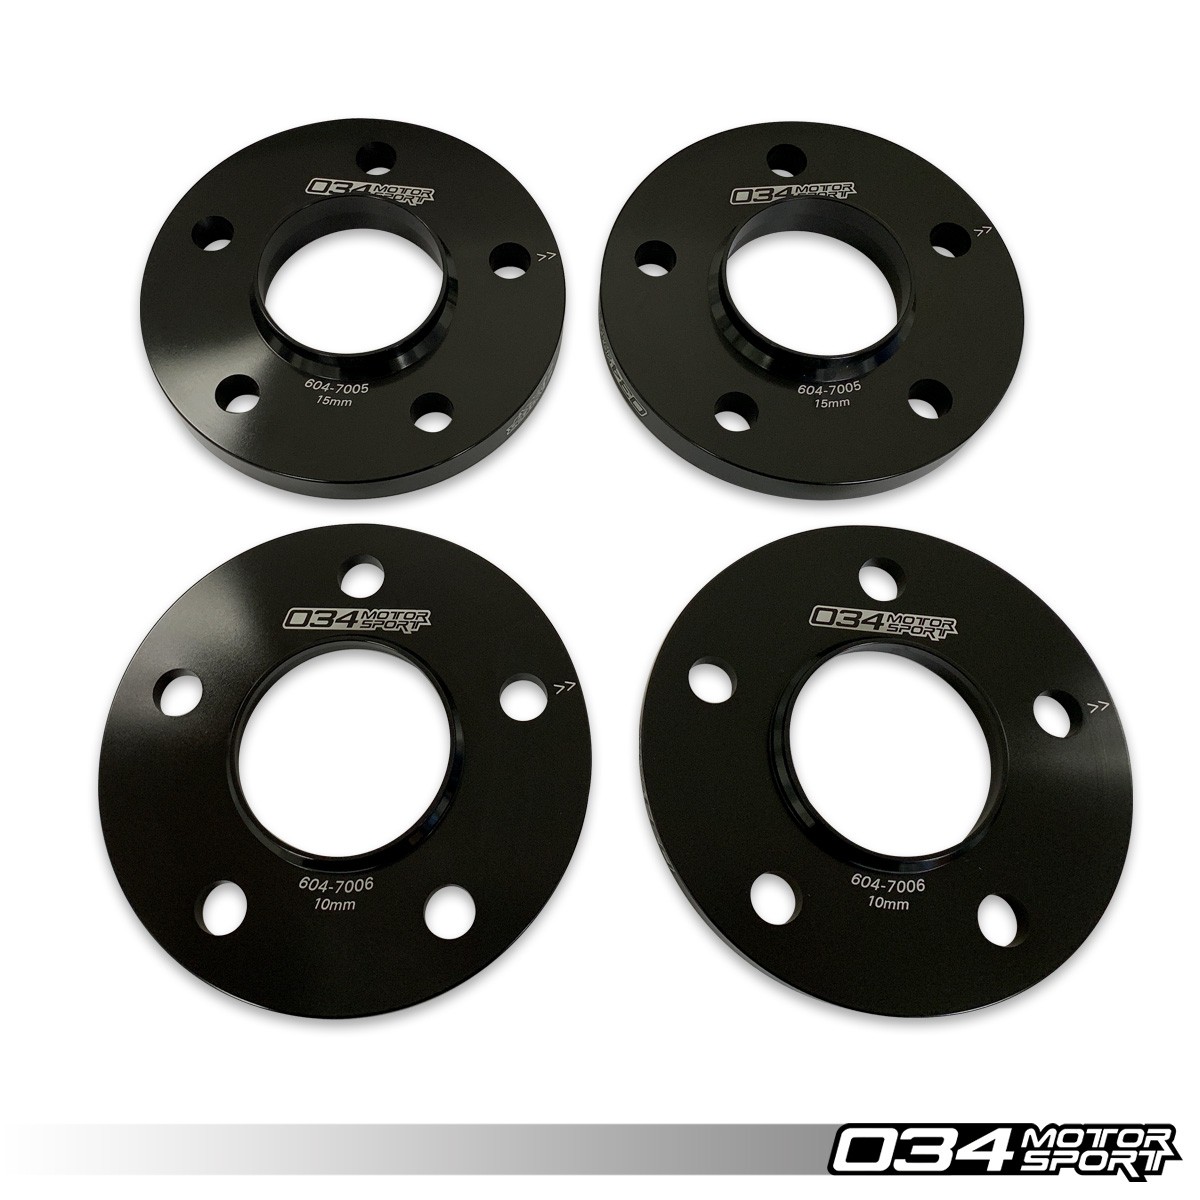 Wheel Spacers Pair of Spacer Shims 5x112 for Audi A4 05-15 B8 3mm